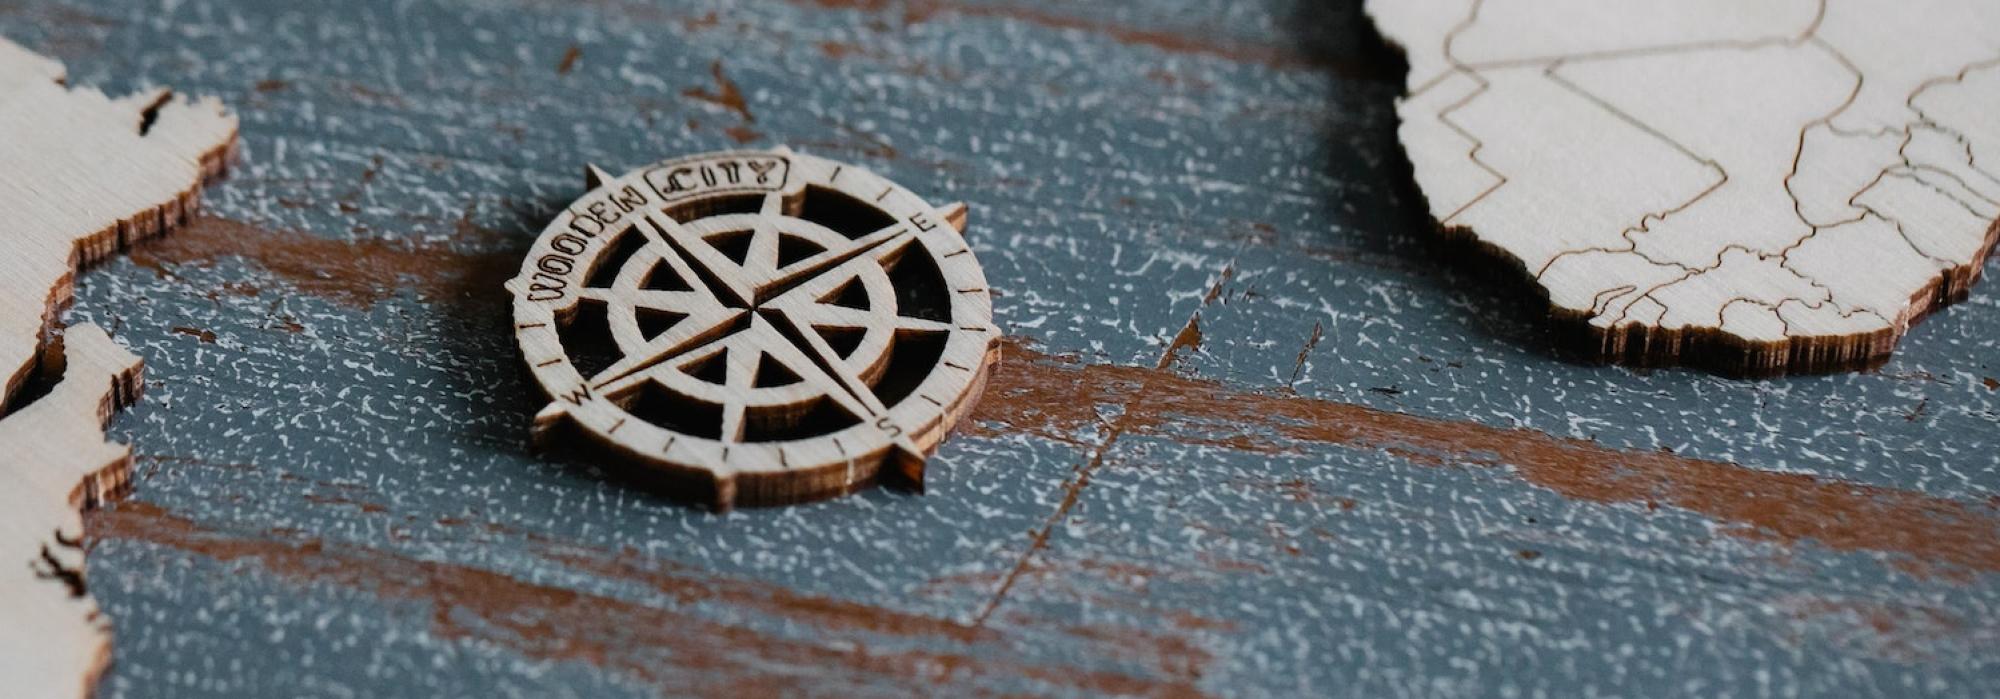 A compass rose sits on a blue and white wooden world map